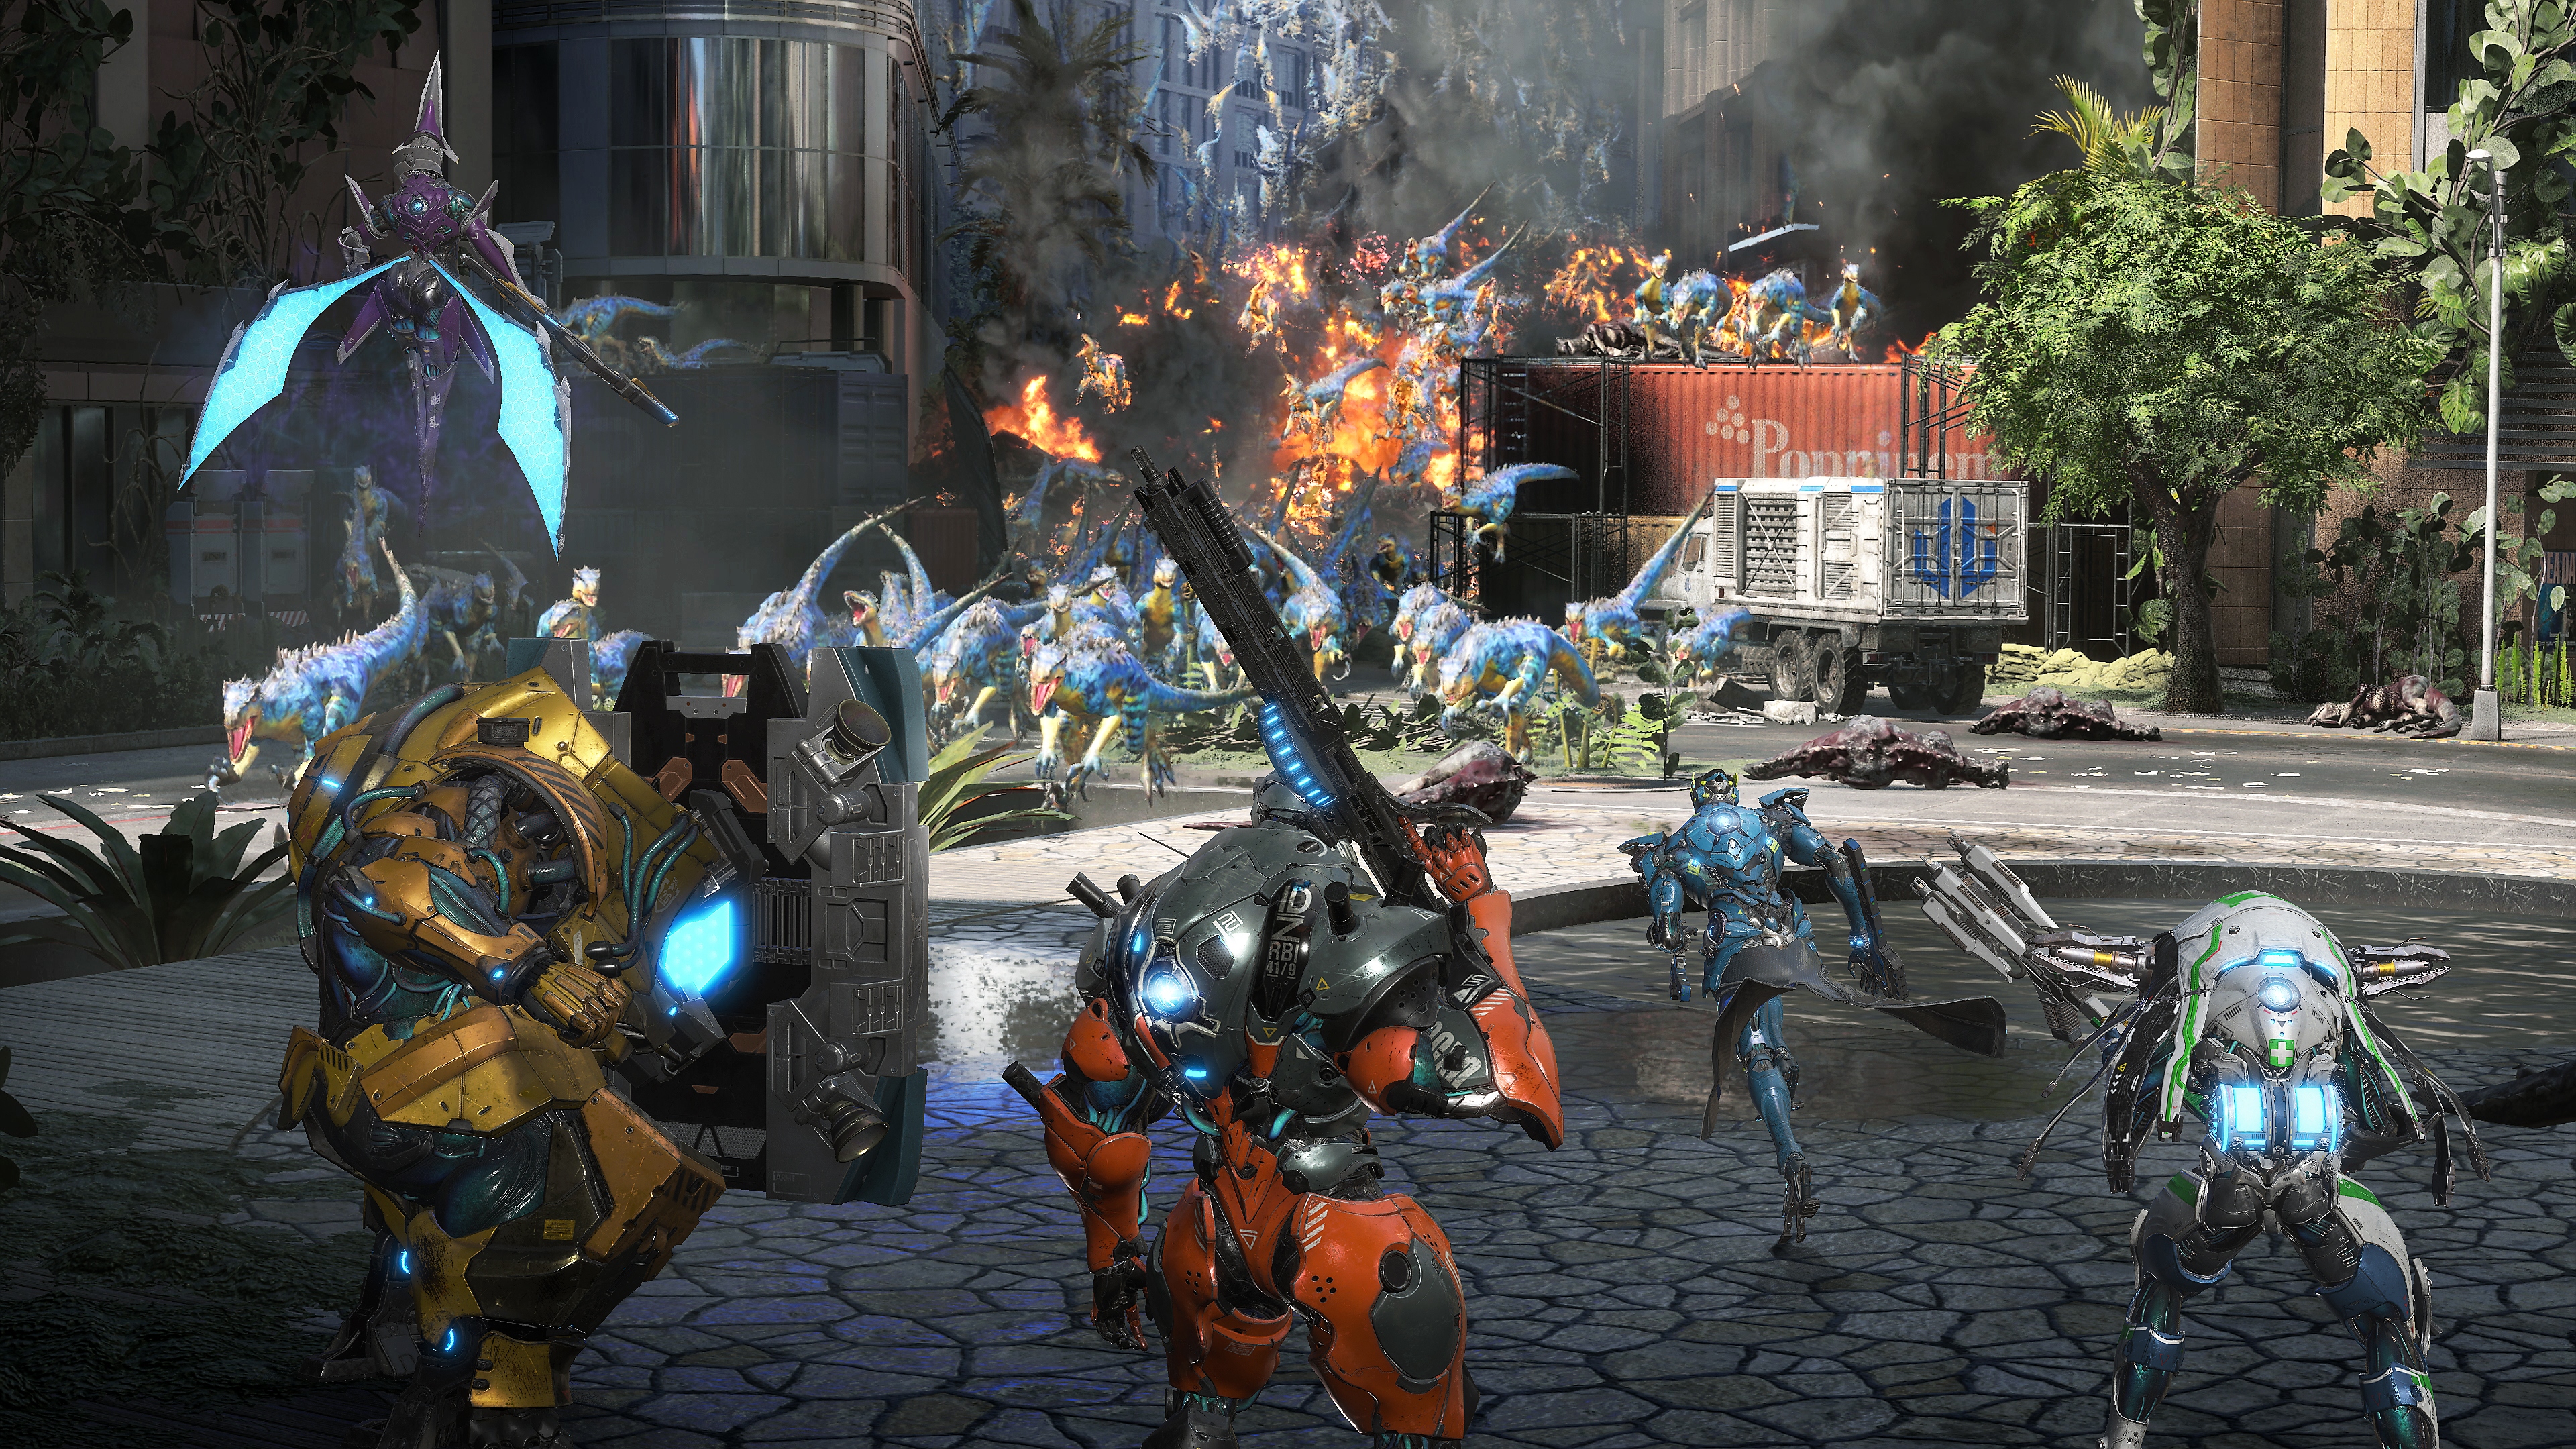 Exoprimal screenshot showing horde of dinosaurs running towards mech-style characters brandishing weapons or shields